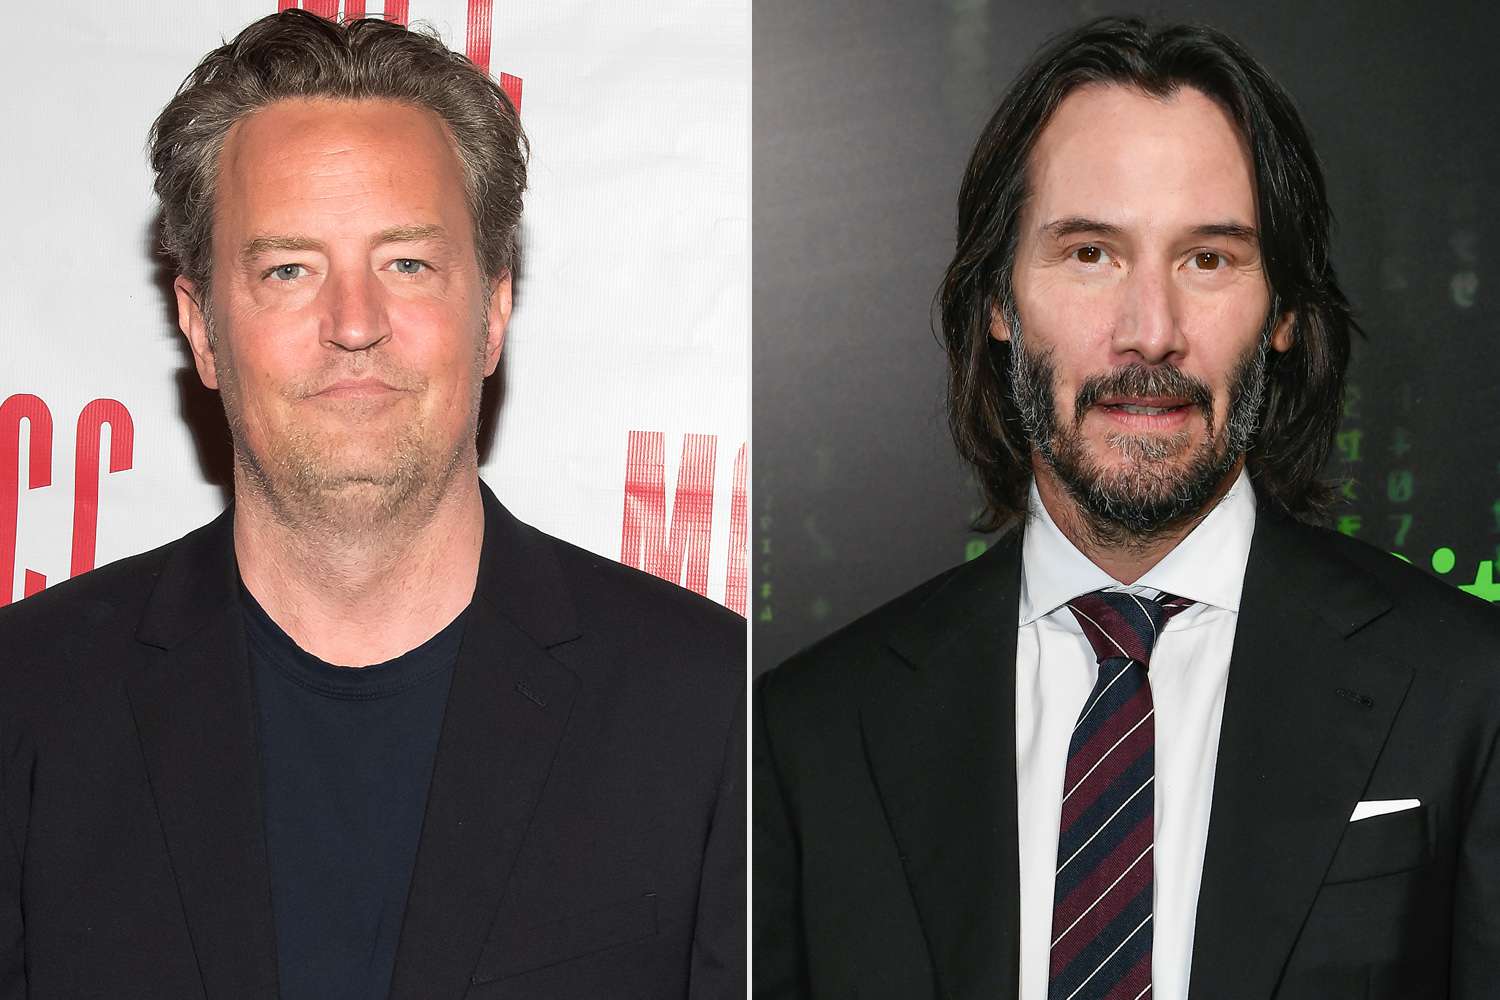 Matthew Perry attends the "The End Of Longing" opening night after party at SushiSamba 7 on June 5, 2017 in New York City. (Photo by Mike Pont/WireImage); Keanu Reeves attends "The Matrix Resurrections" Red Carpet U.S. Premiere Screening at The Castro Theatre on December 18, 2021 in San Francisco, California. (Photo by Steve Jennings/Getty Images)